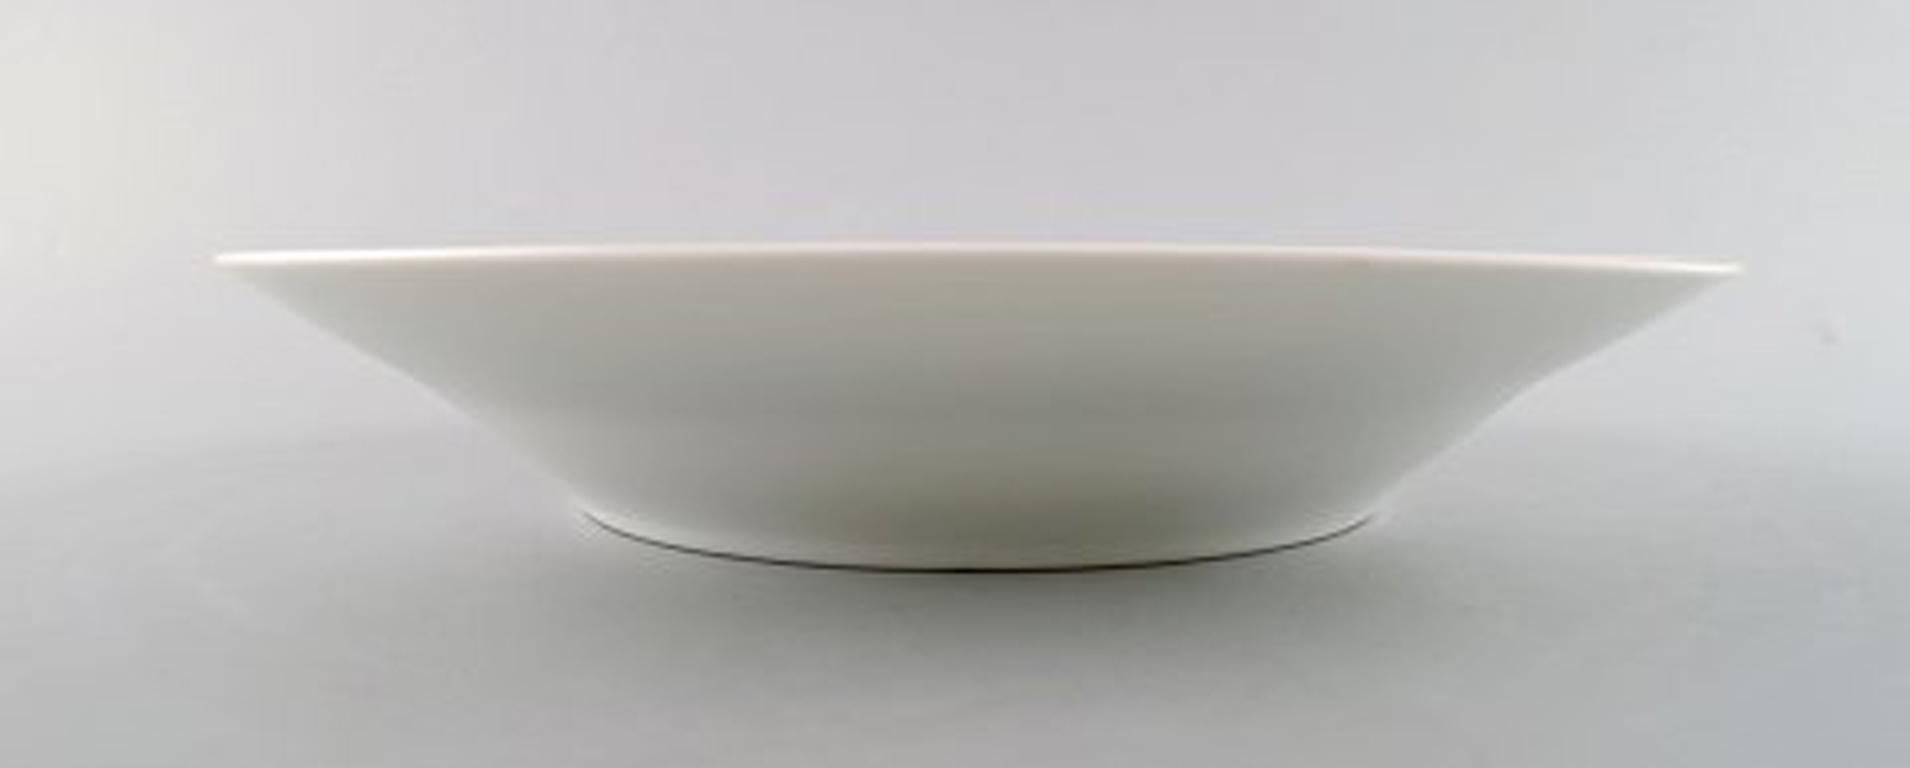 Royal Copenhagen Axel Salto service, white.
Deep plate. 8 pieces. In stock.
Measures: 25 cm x 4.5 cm
In very good condition. 1st factory quality.